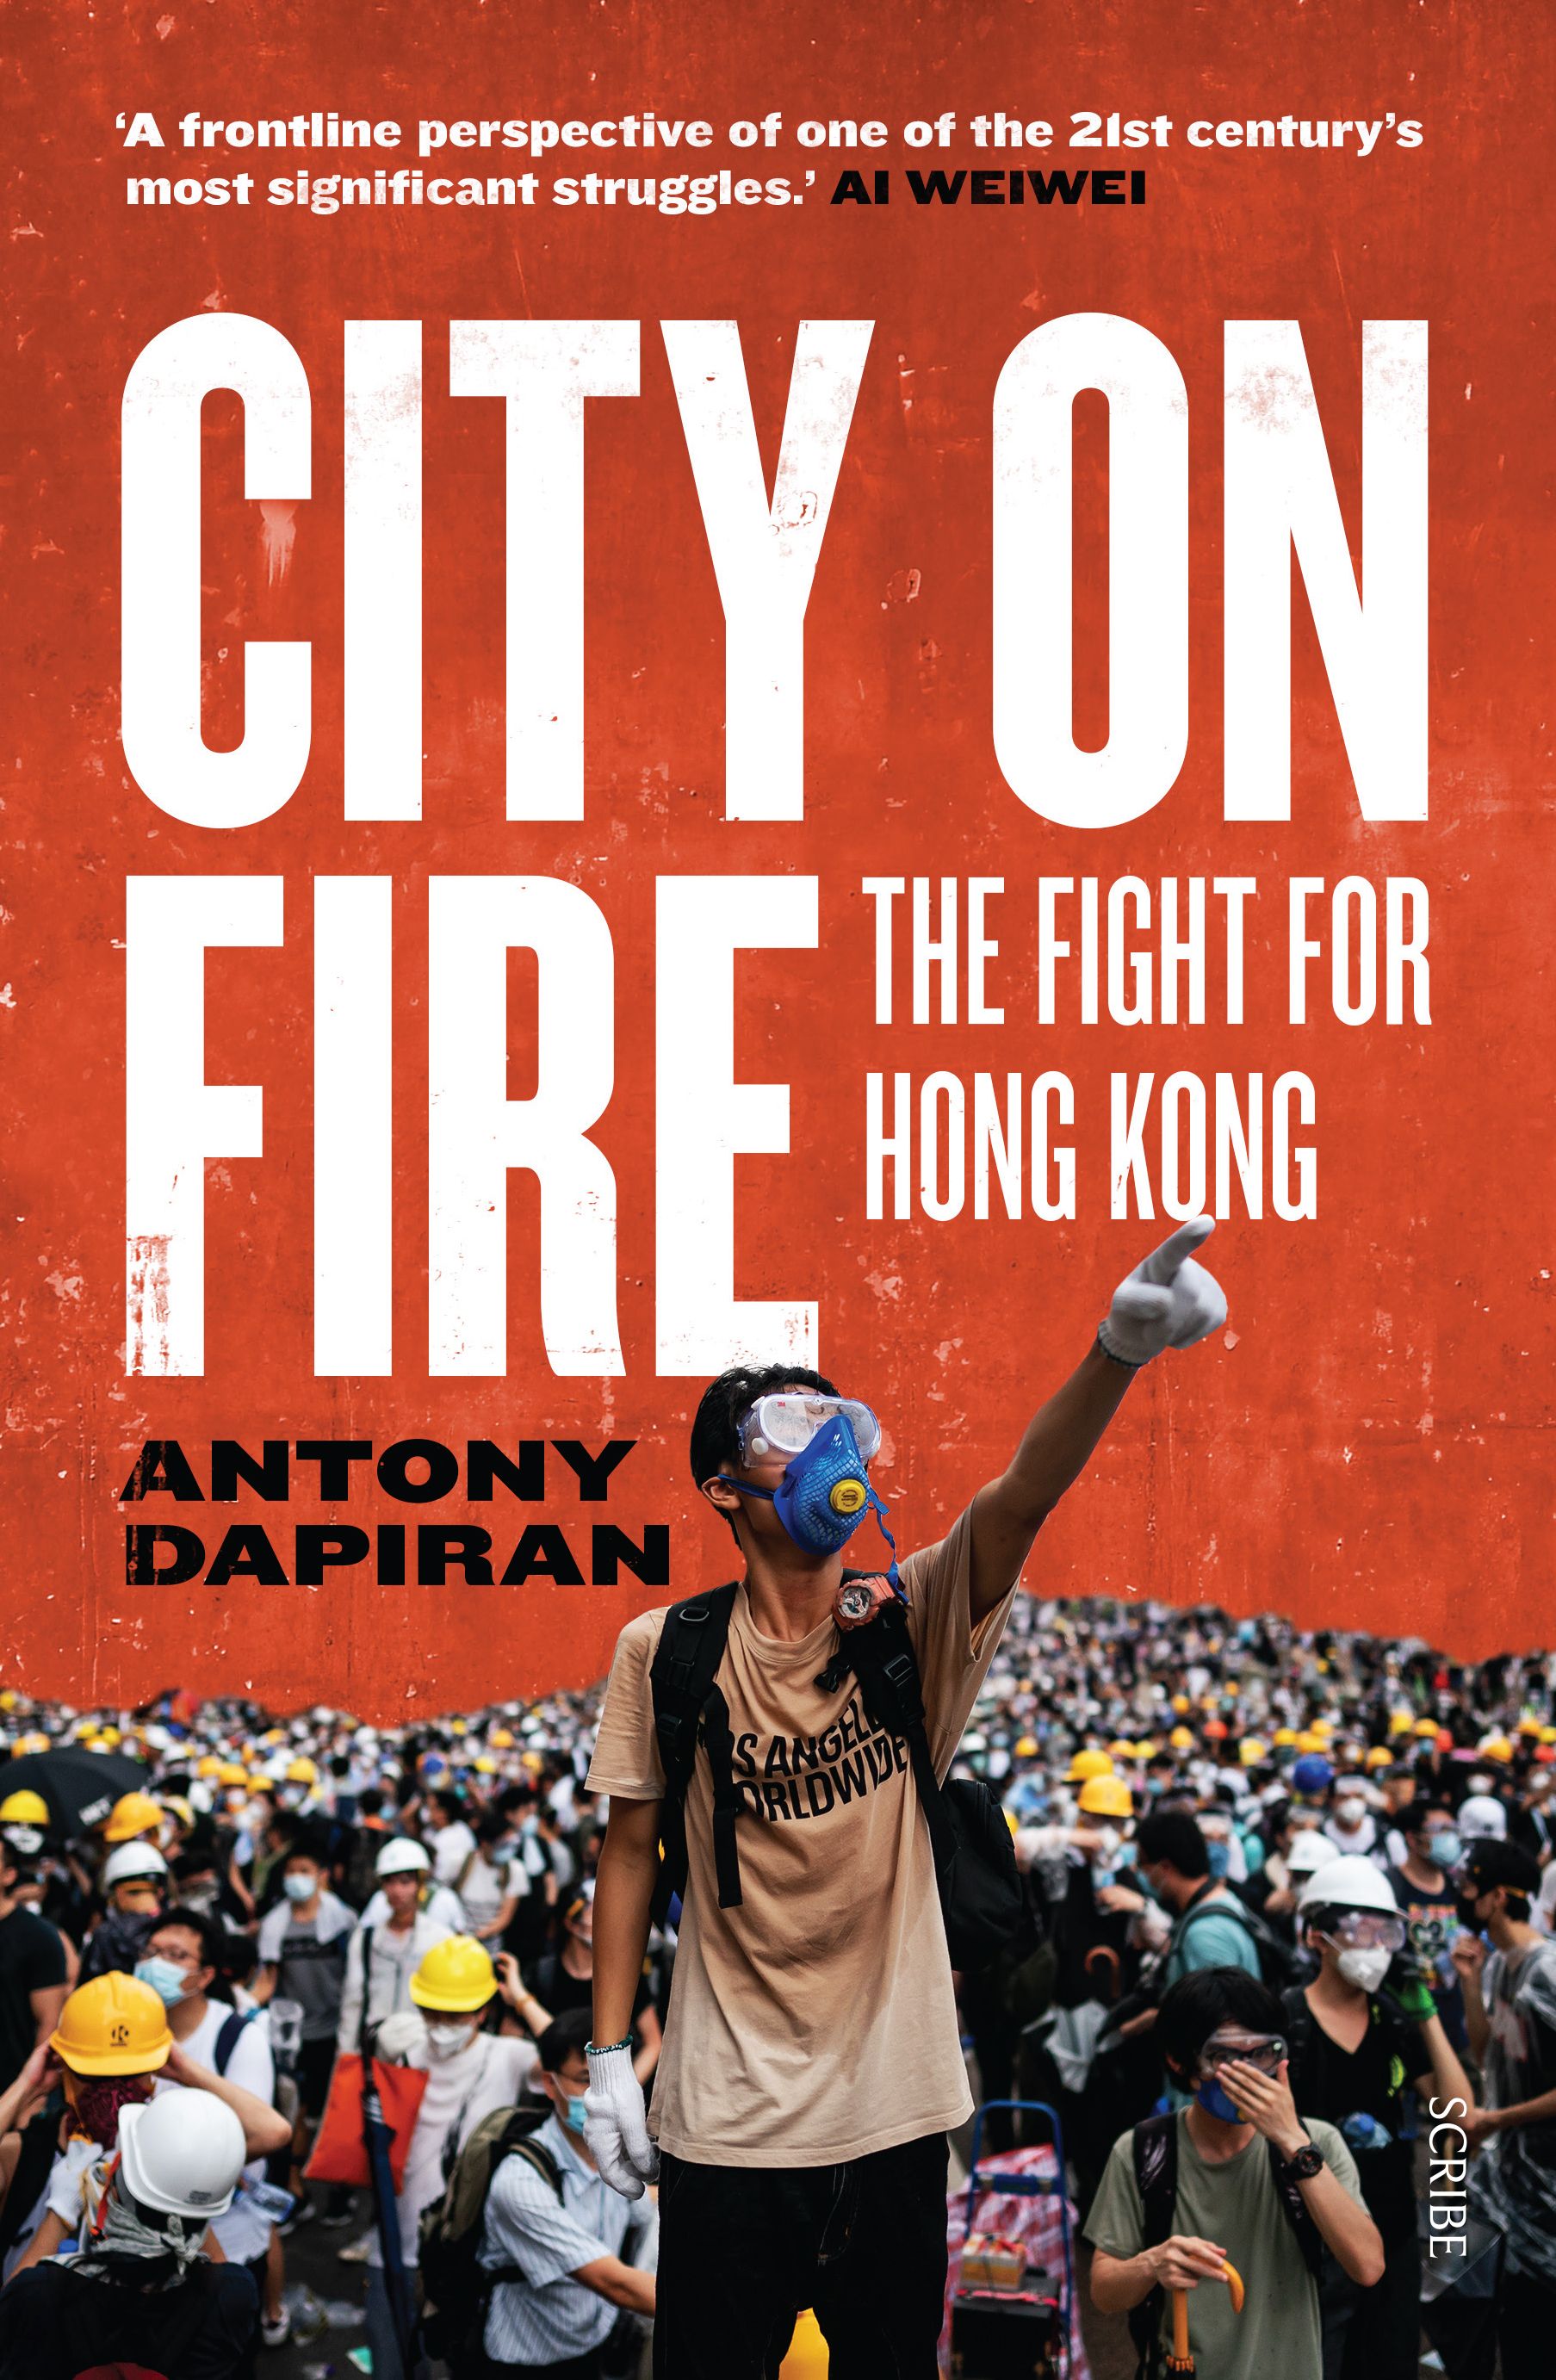 Book cover of “City on Fire: The Fight for Hong Kong"